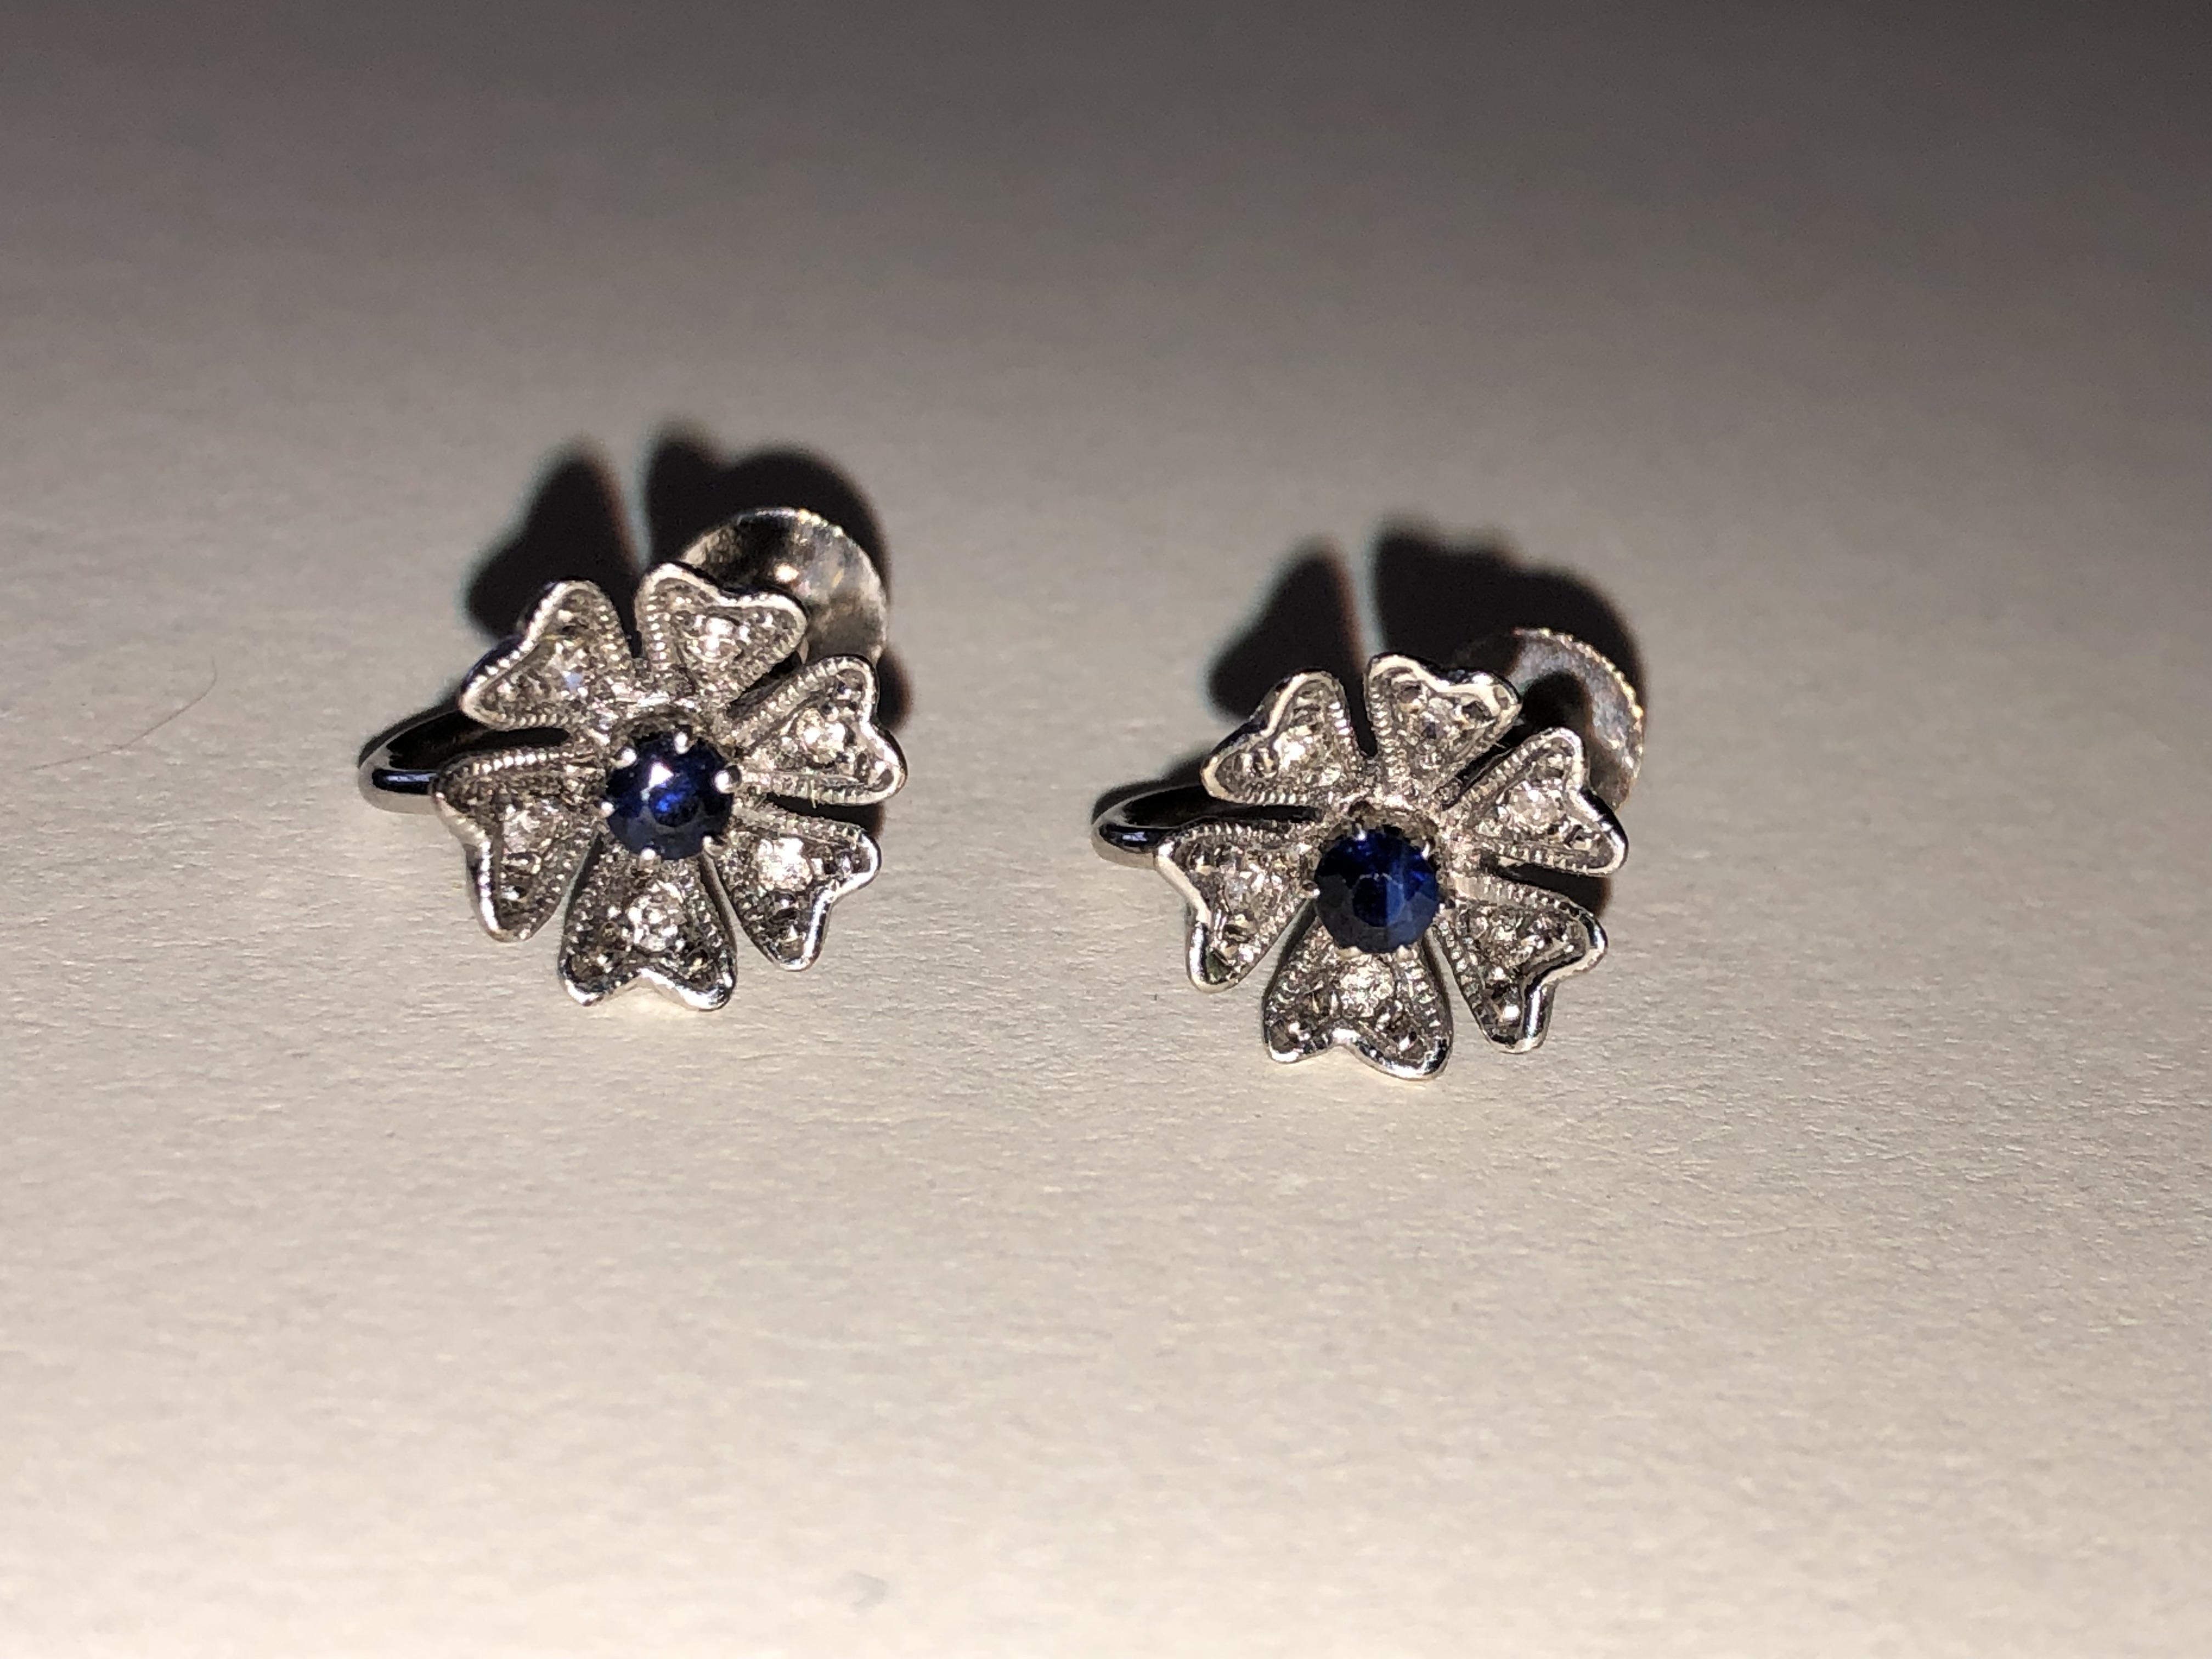 PAIR OF 9CT WHITE GOLD SAPPHIRE AND DIAMOND CLUSTER EARRINGS WITH SCREW BACK FITTINGS - Image 2 of 6